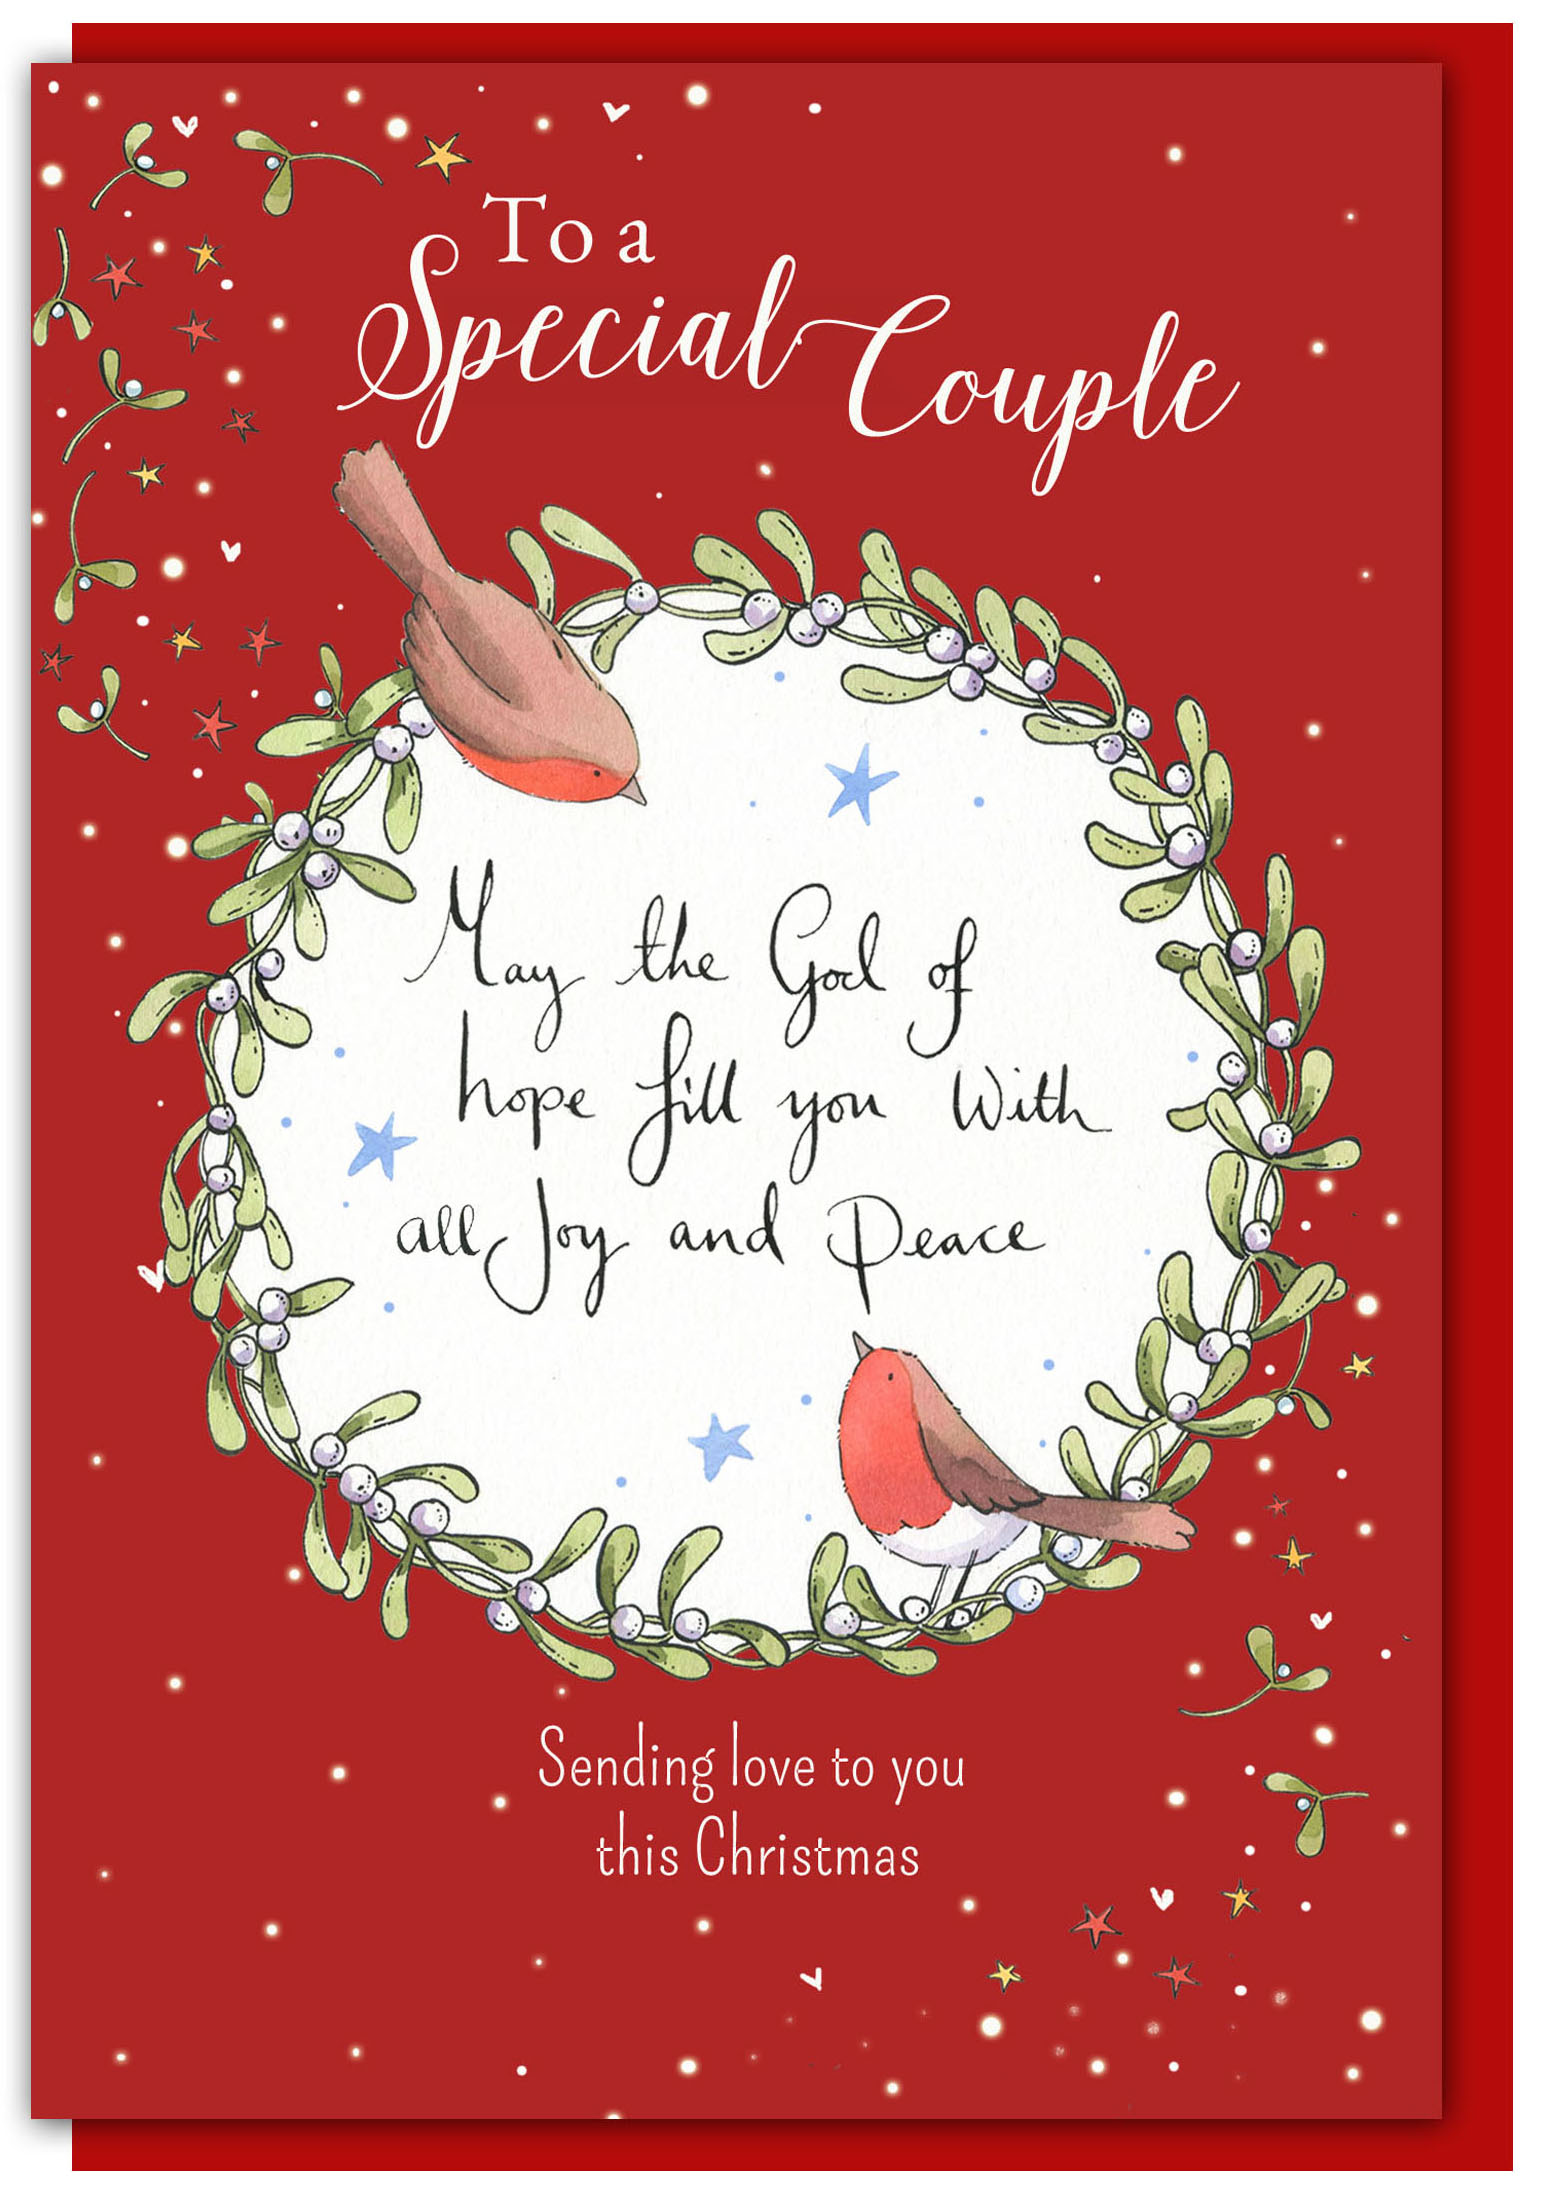 Special Couple Christmas Card | Free Delivery when you spend £10 @ Eden